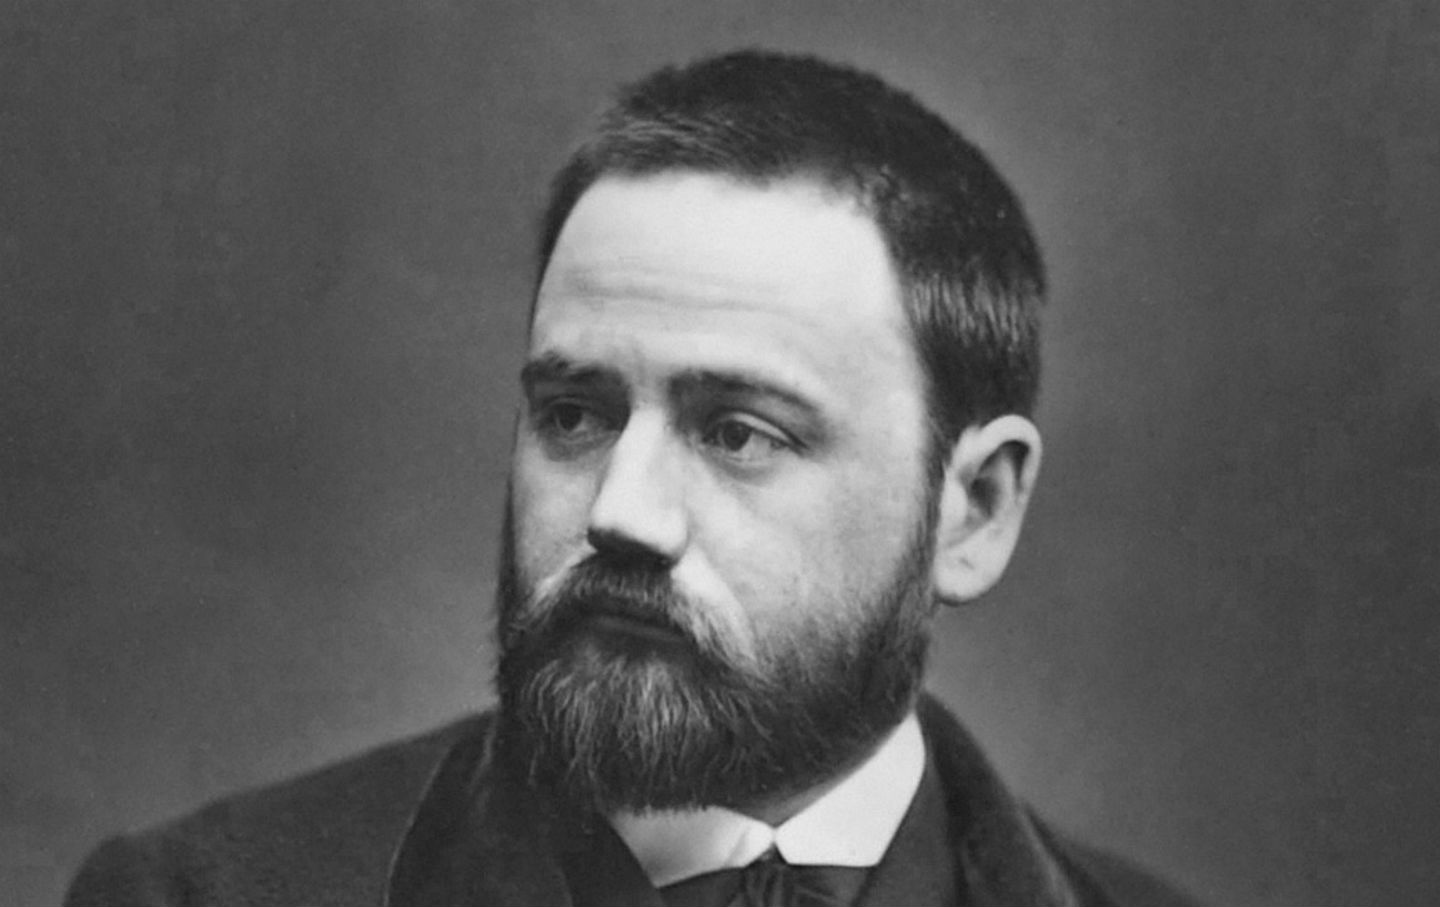 July 19, 1898: Emile Zola Flees France After Being Convicted of Libel in the Dreyfus Affair